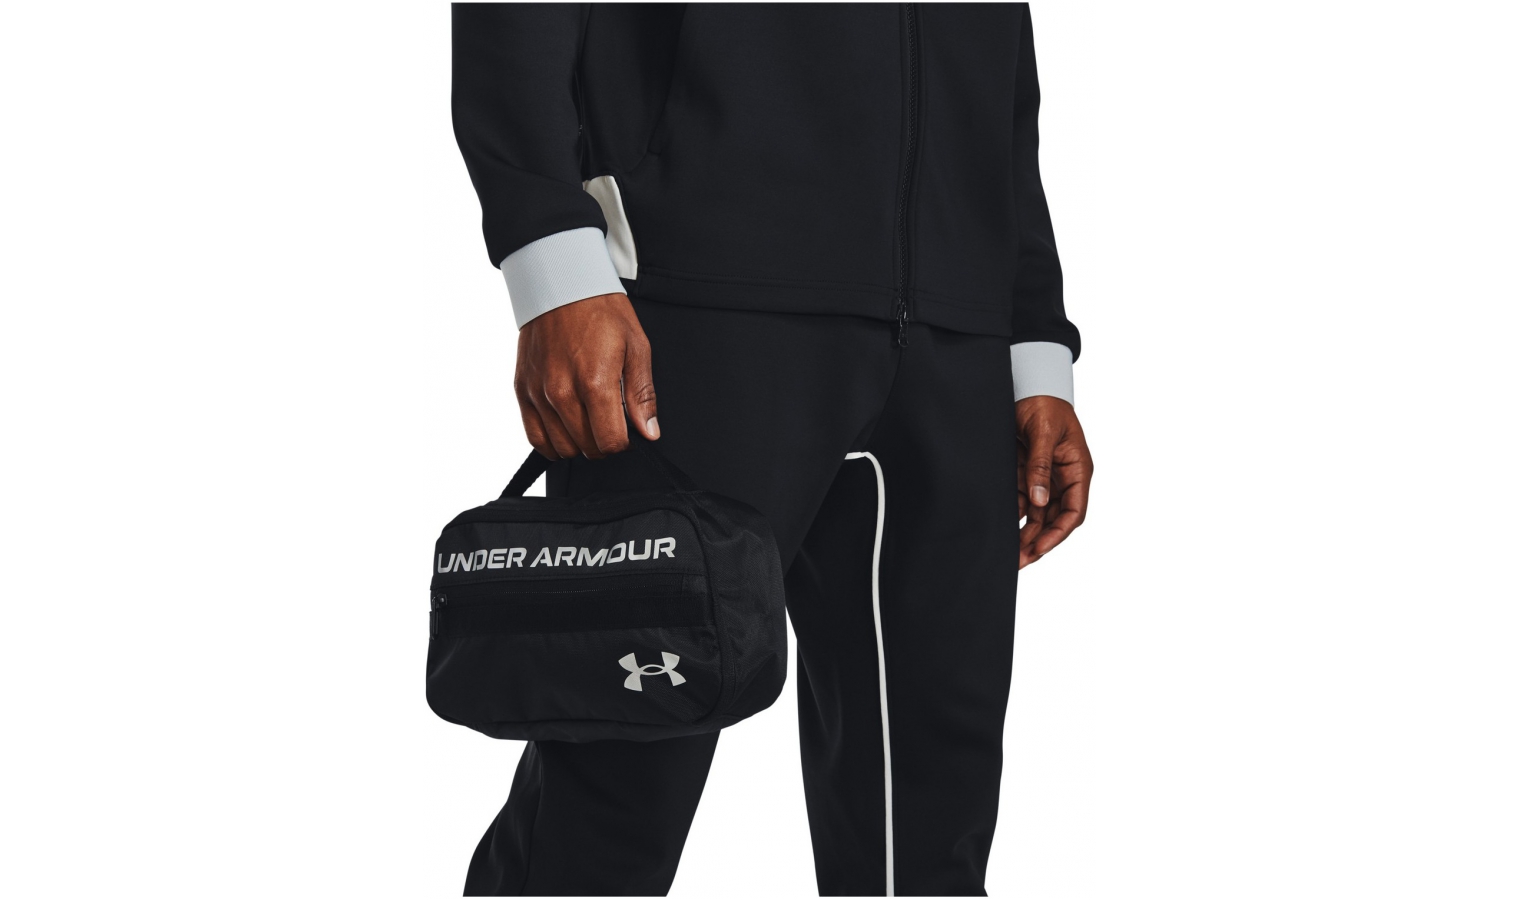 Bag Under Armour CONTAIN TRAVEL KIT black | AD Sport.store